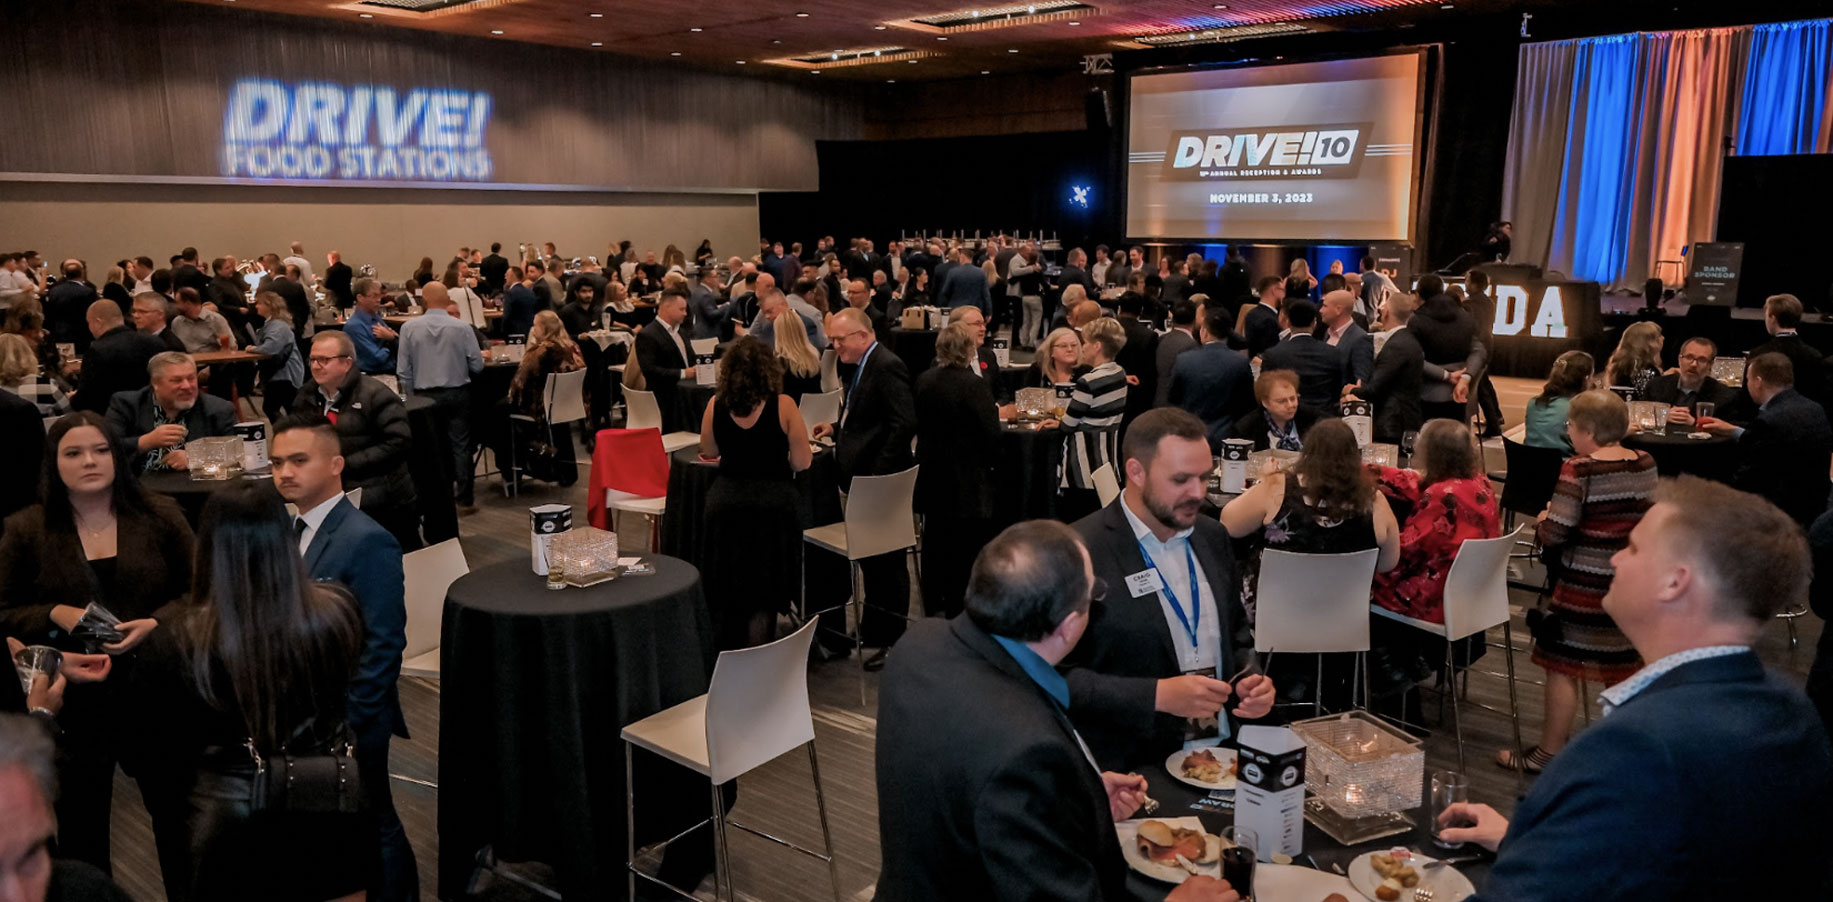 Dealers in the spotlight at DRIVE! event in Manitoba